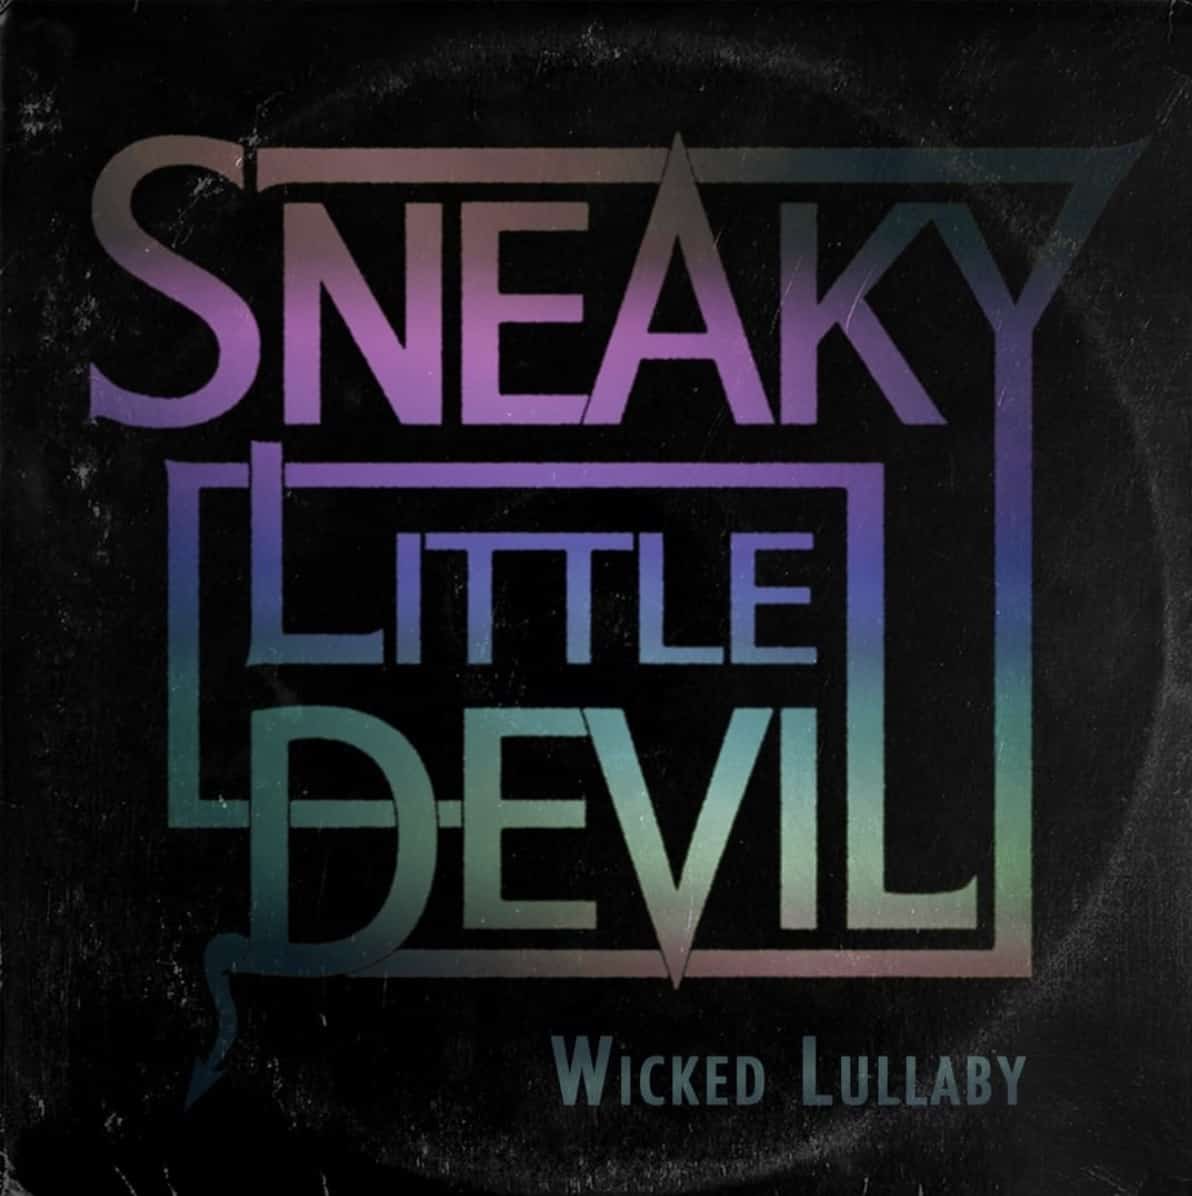 WICKED LULLABY: New music from Sneaky Little Devil